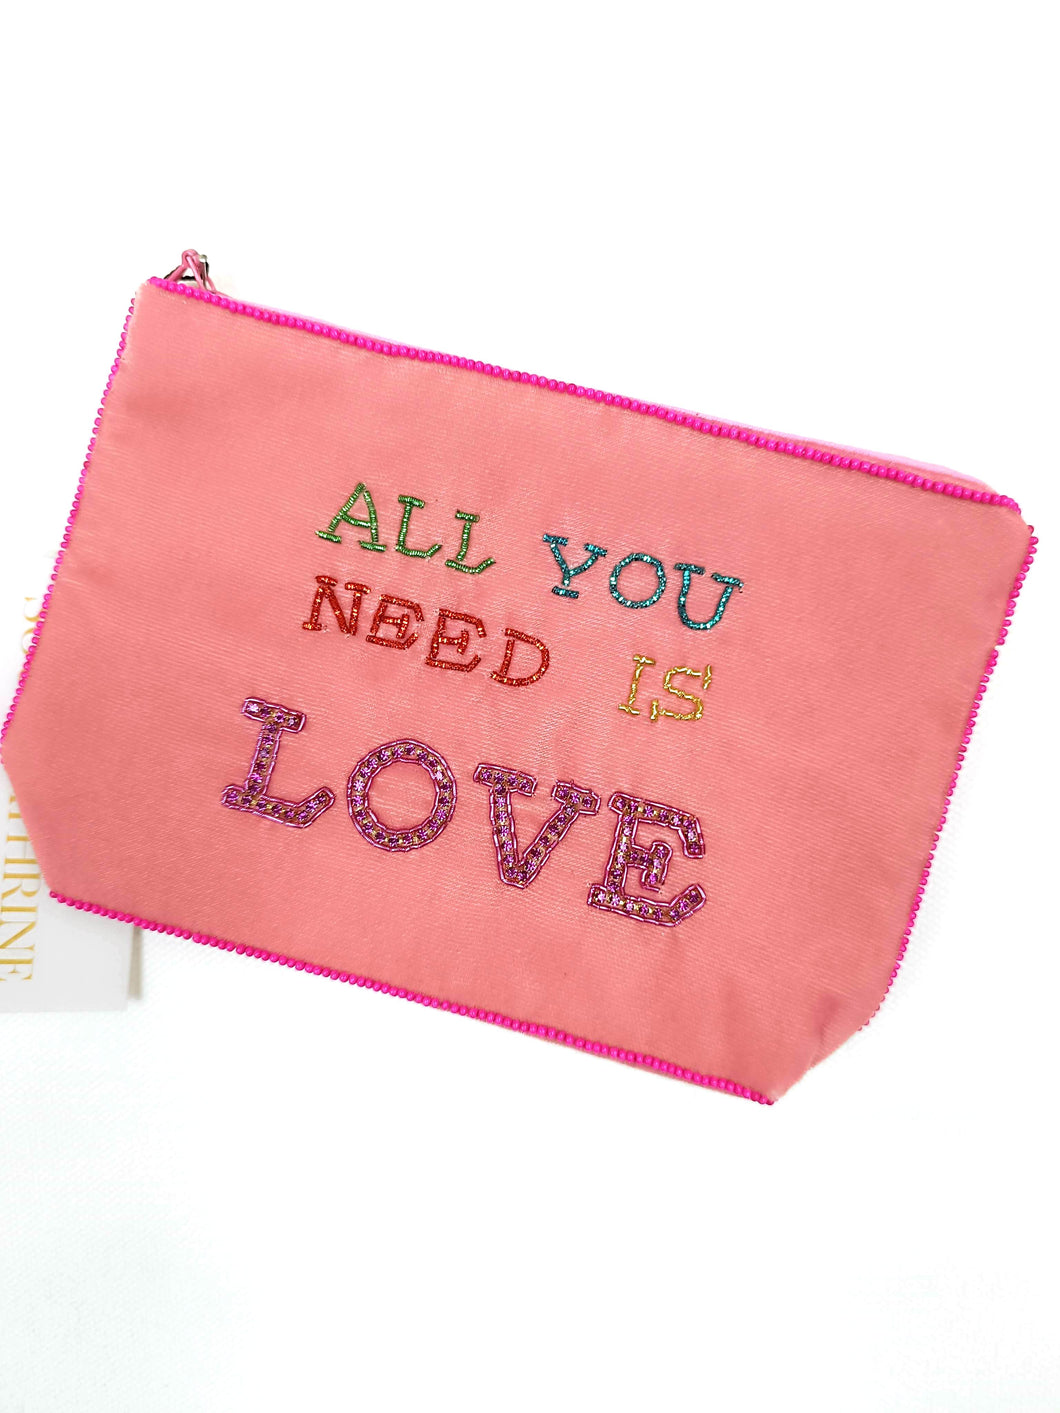 TASCHE POUCH NEED YOU ROSÉ SOUL KATHRINE